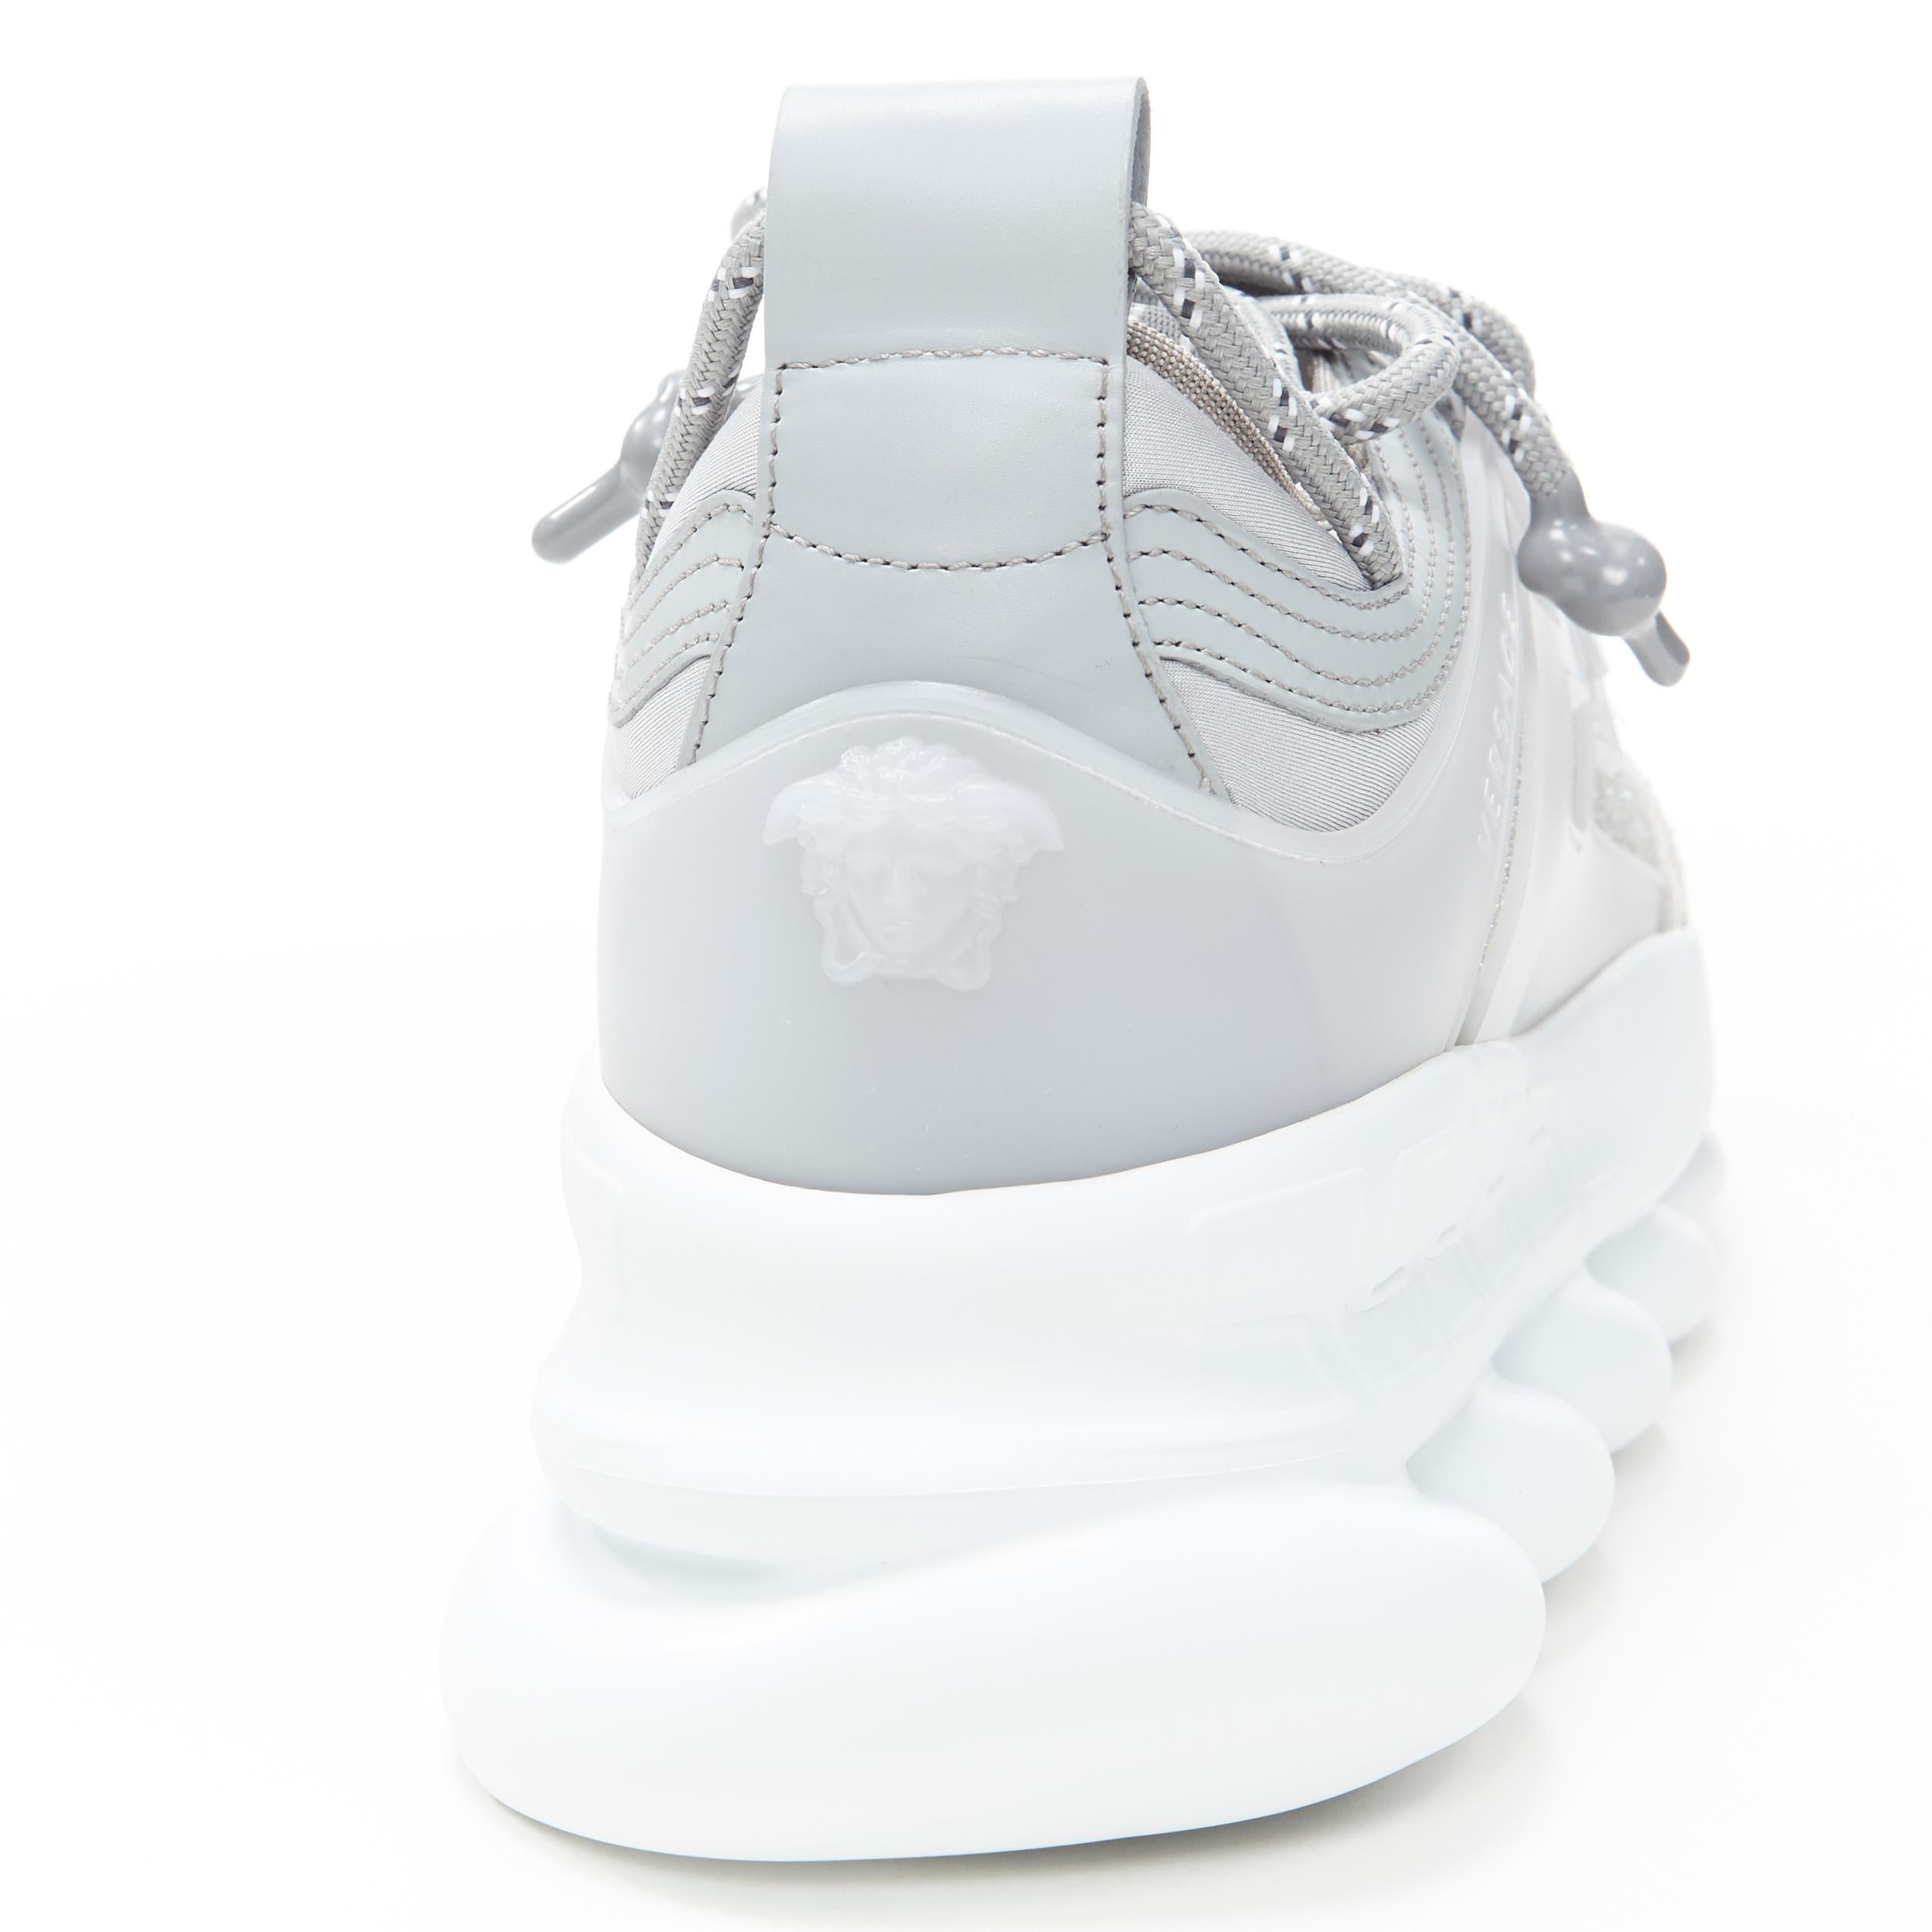 new VERSACE Chain Reaction Reflective Silver Crystal Rhinestone sneaker EU41 US8 For Sale 6